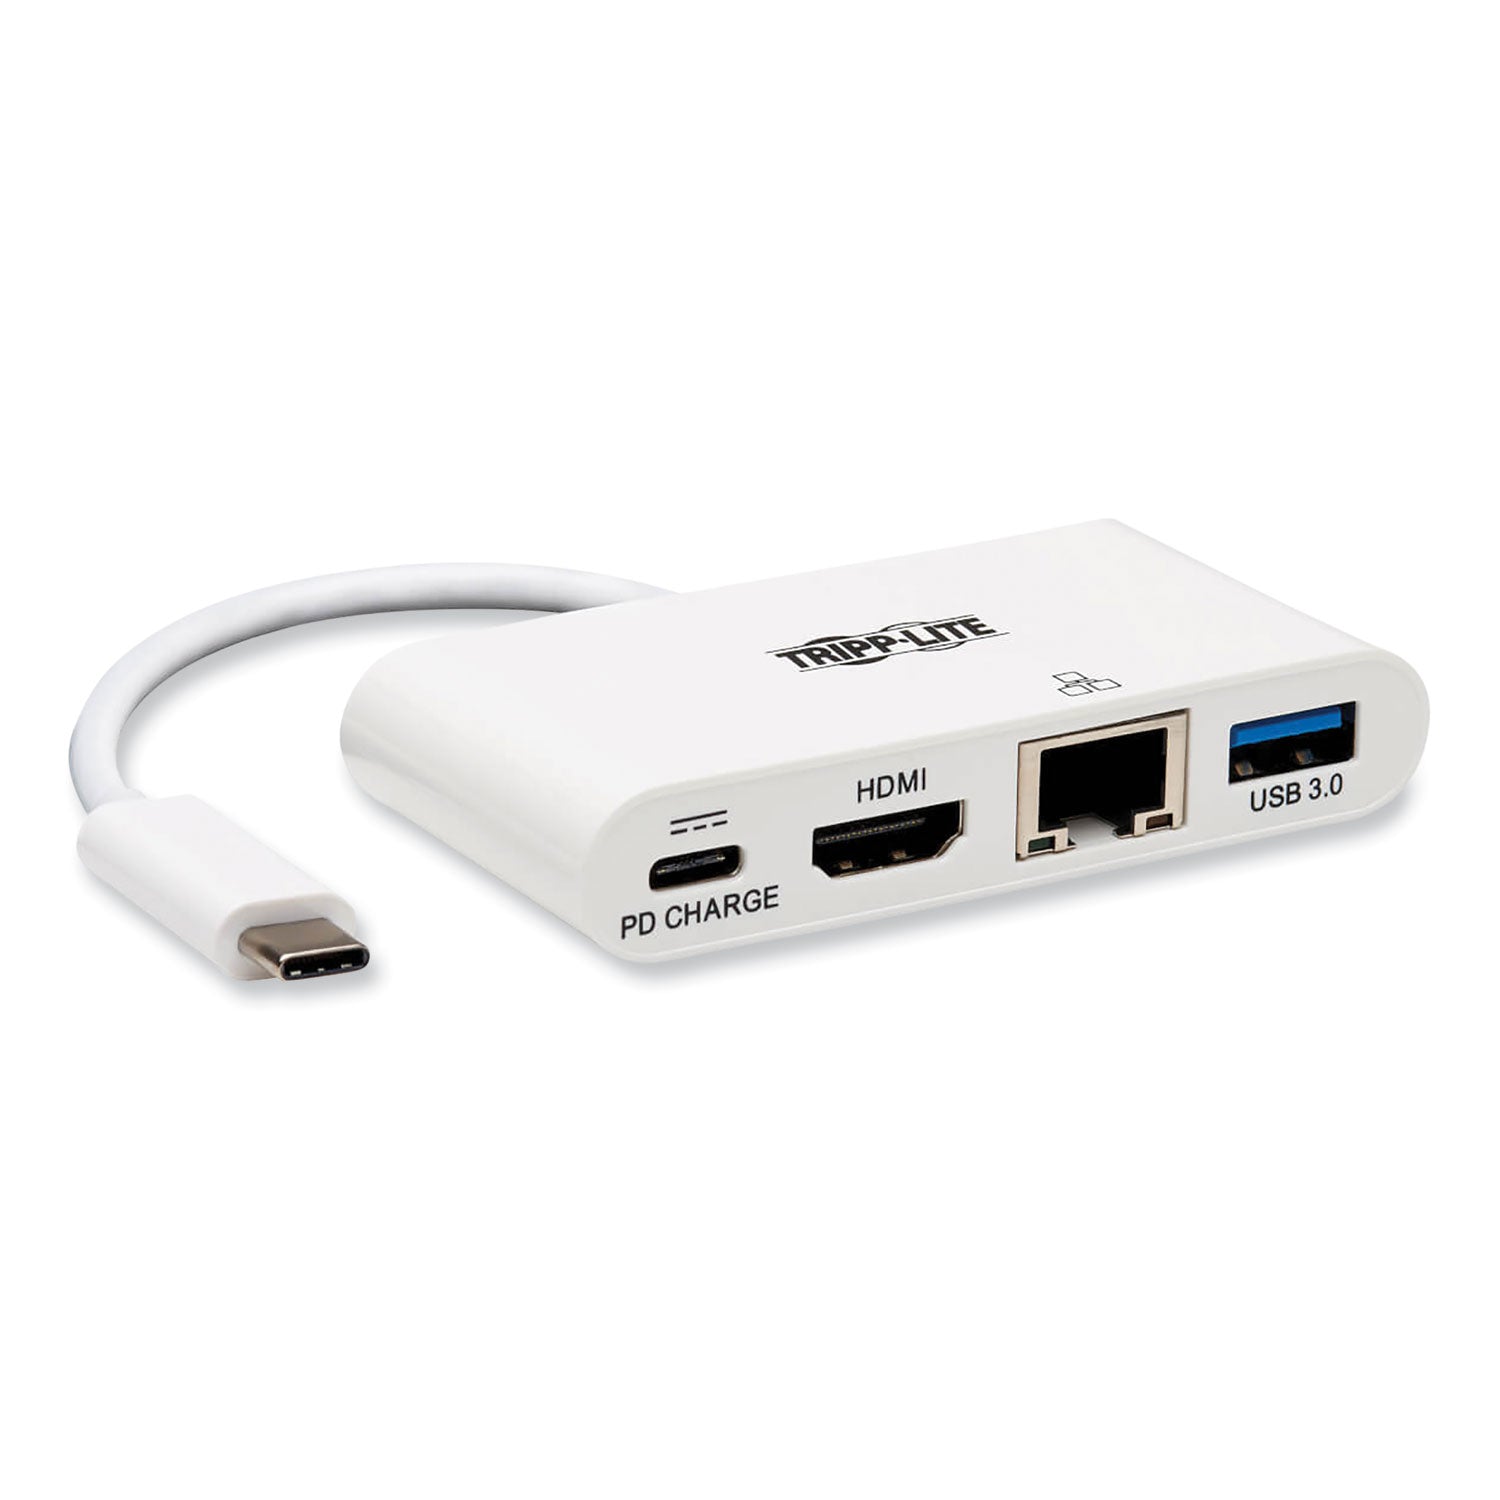 4k-dock-with-charging-and-ethernet-usb-c-4k-hdmi-usb-a-pd-charging-white_trpu44406nh4guc - 1